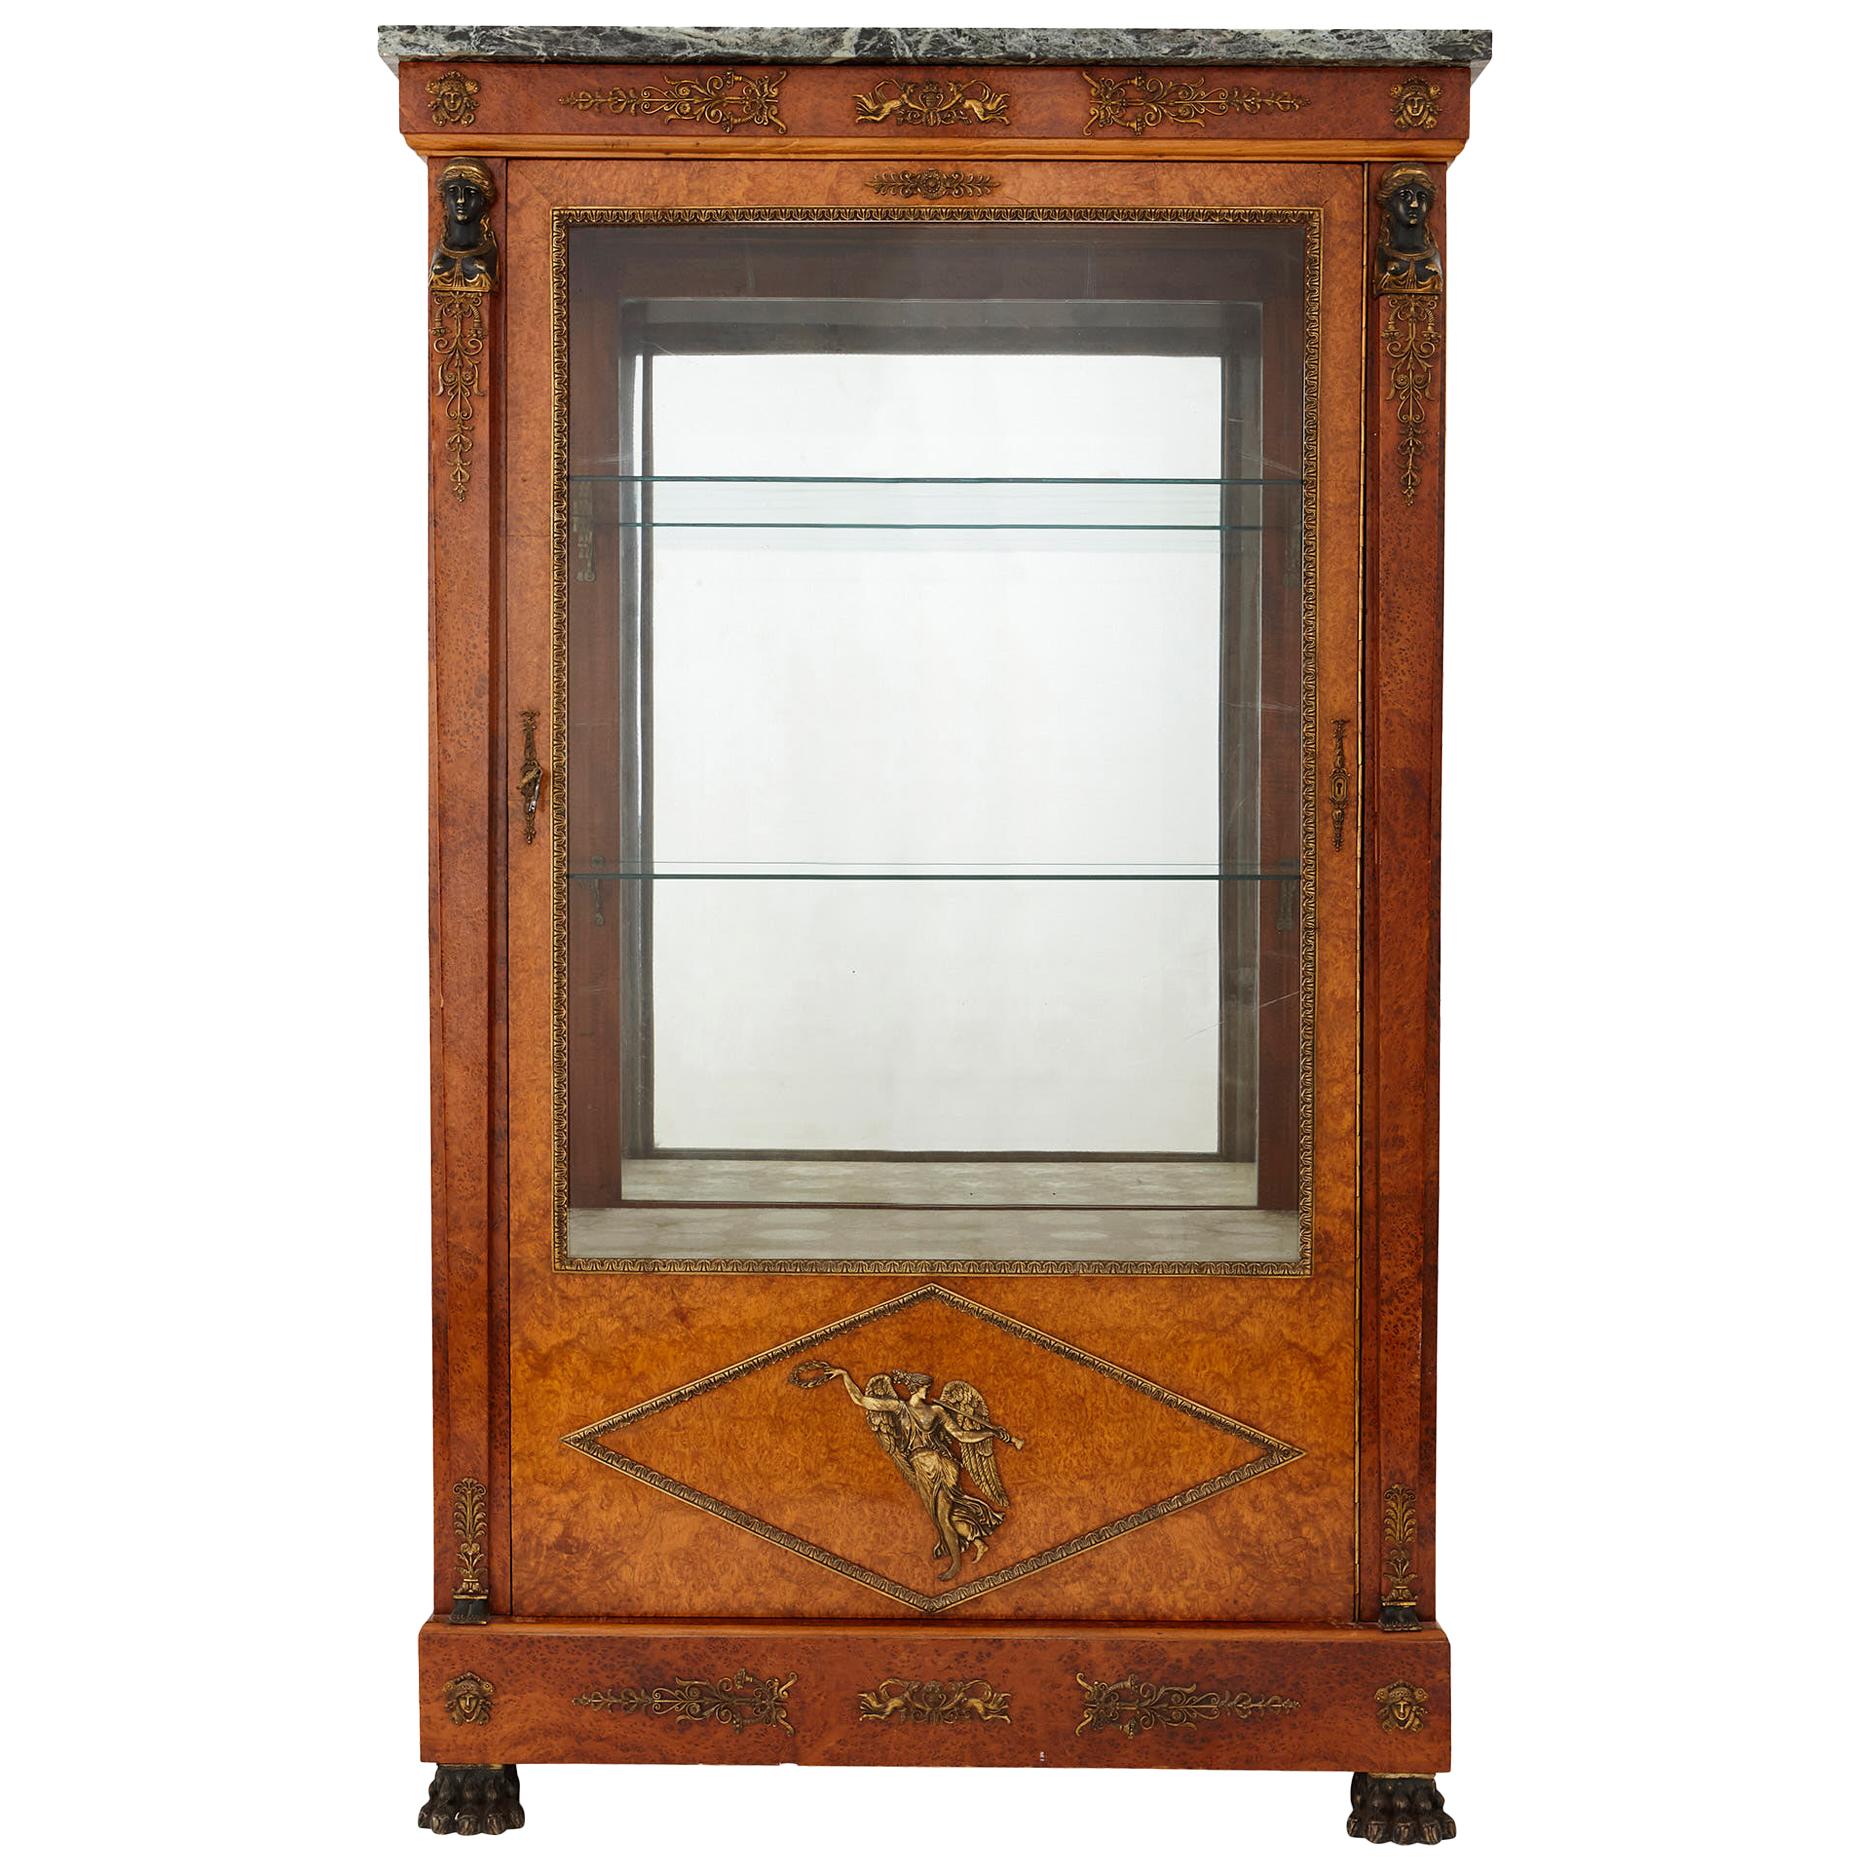 Burr-Amboyna, Marble, Gilt and Patinated Bronze Cabinet by Maison Krieger